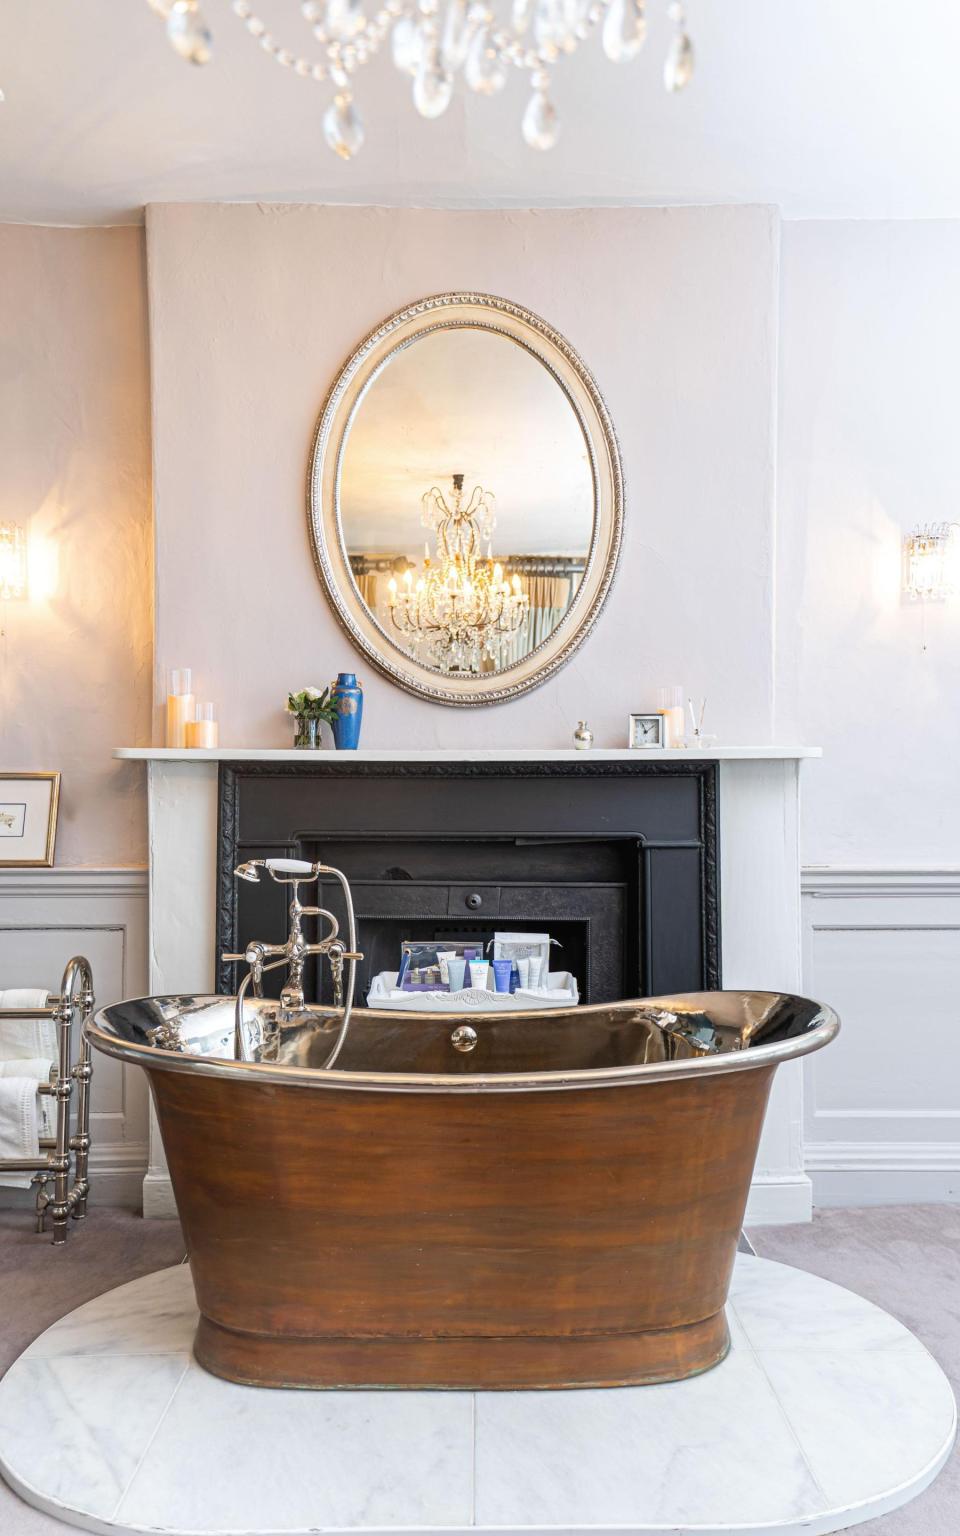 The freestanding tub in The Townhouse at Gainsborough Bath Spa